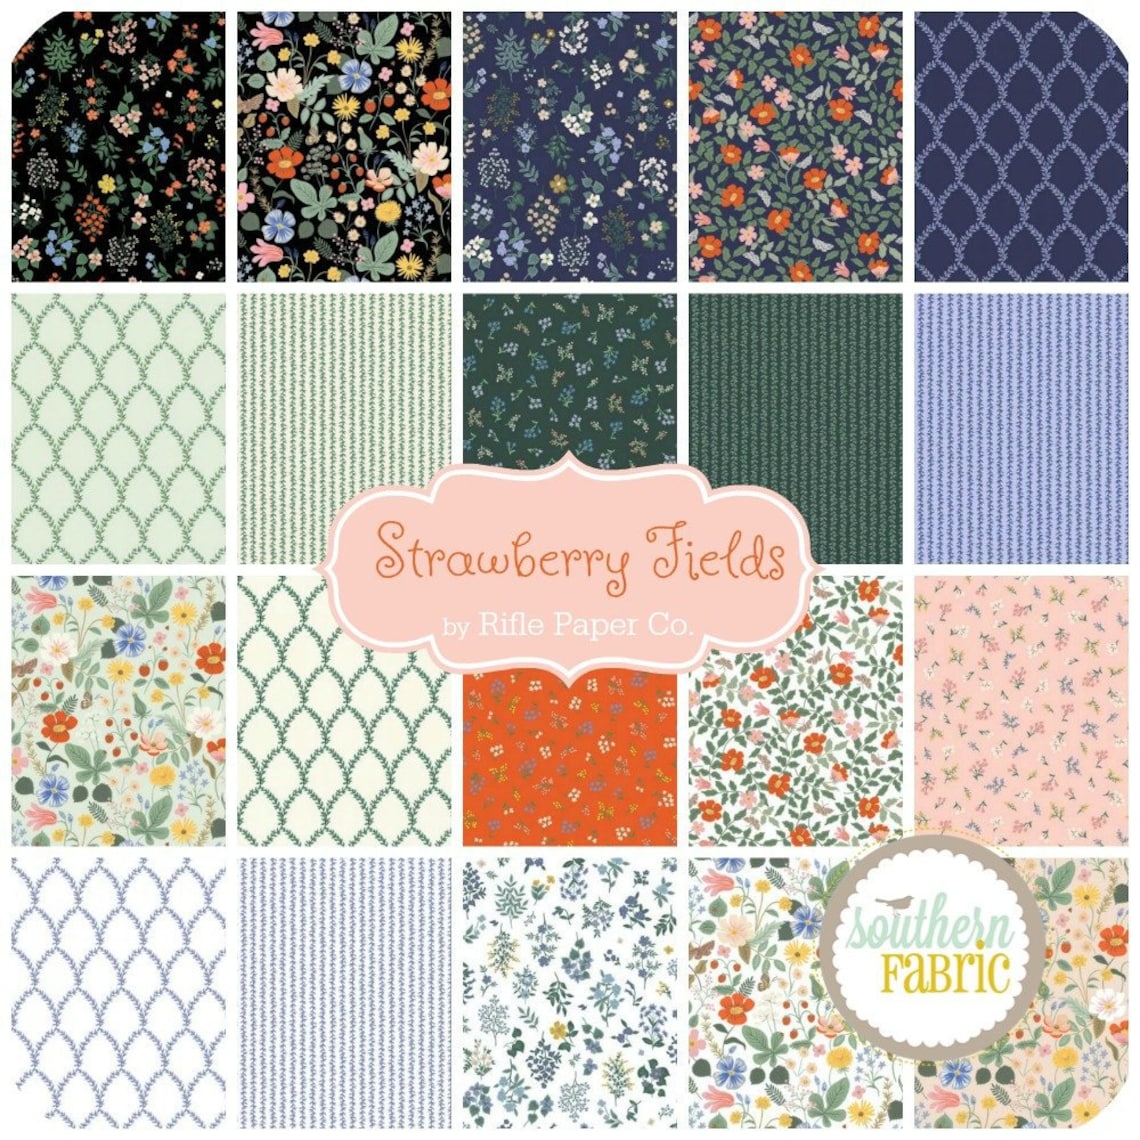 Strawberry Fields Layer Cake 42 pcs by Rifle Paper Co. for | Etsy